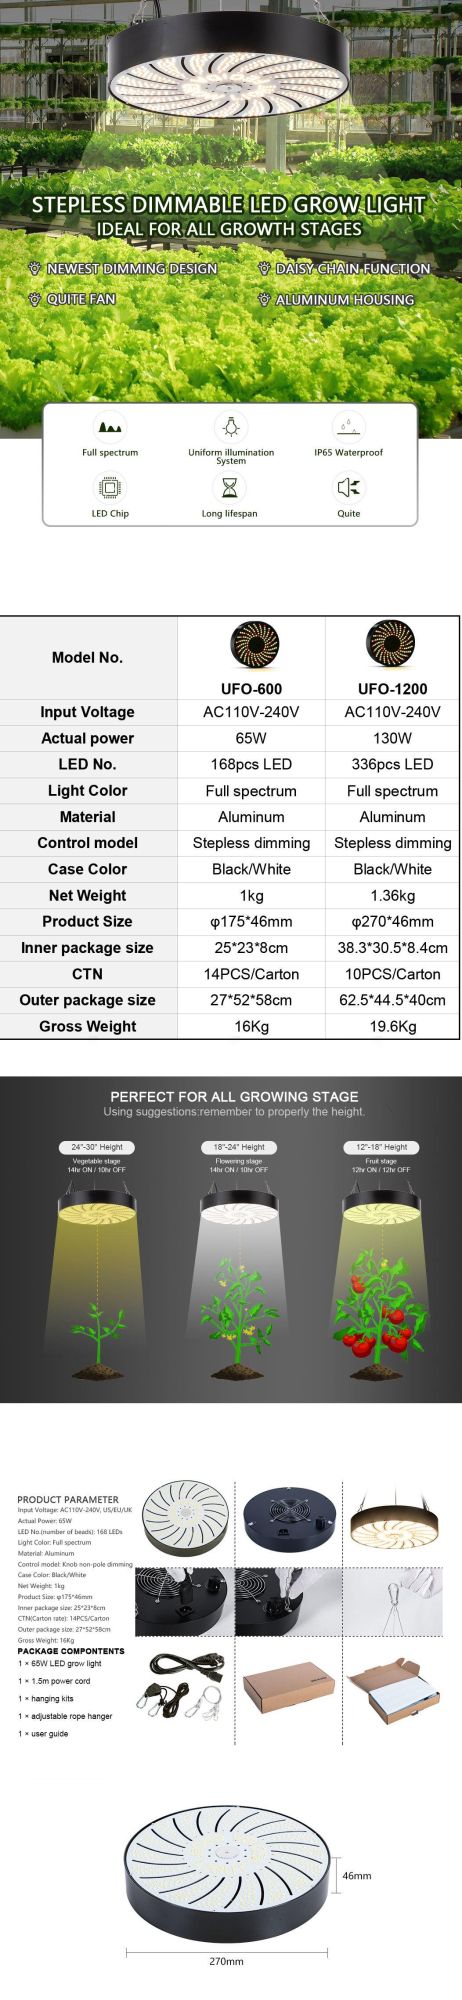 Ideal Full Spectrum Sunlight Lamp  with 168 LEDs, Dimmable Plant Grow Lamp for Indoor Garden Plants and Greenhouse Plants Such as Veg,Succulents,Flower,Hydropon